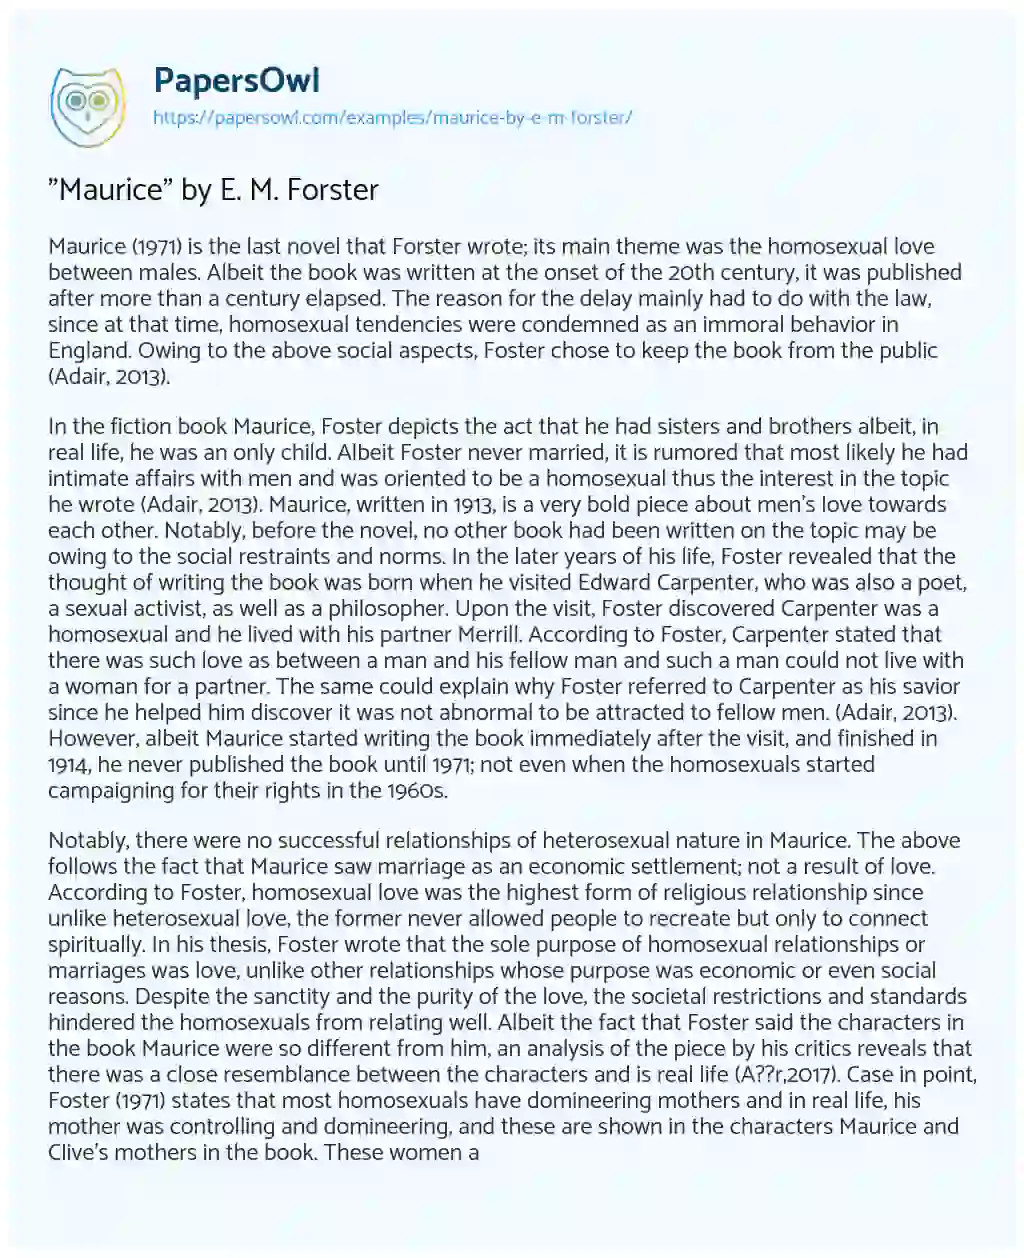 Essay on “Maurice” by E. M. Forster